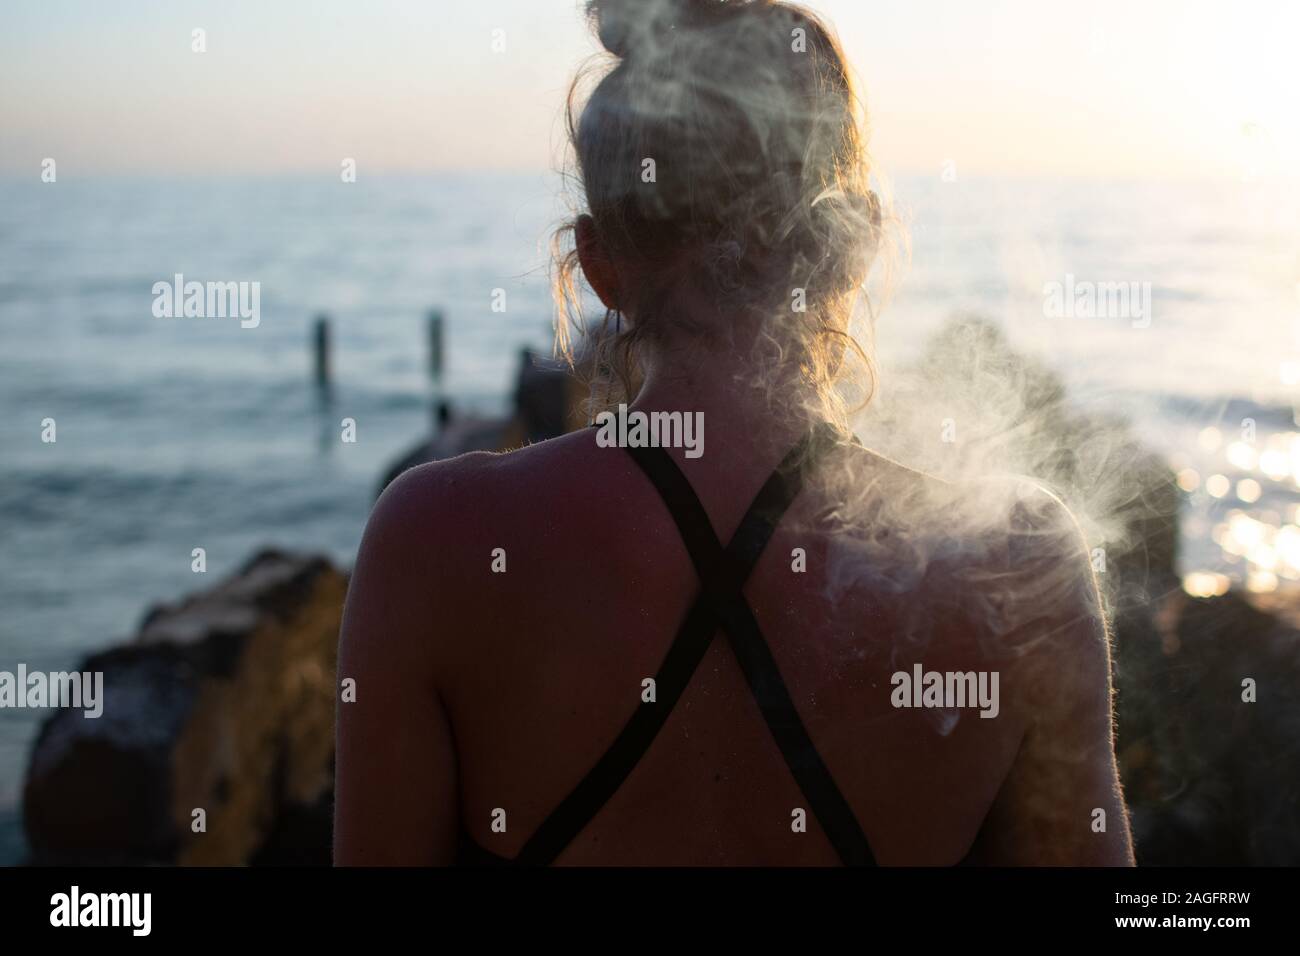 Female smoking a joint shot from behind with a blurred sea in the background Stock Photo